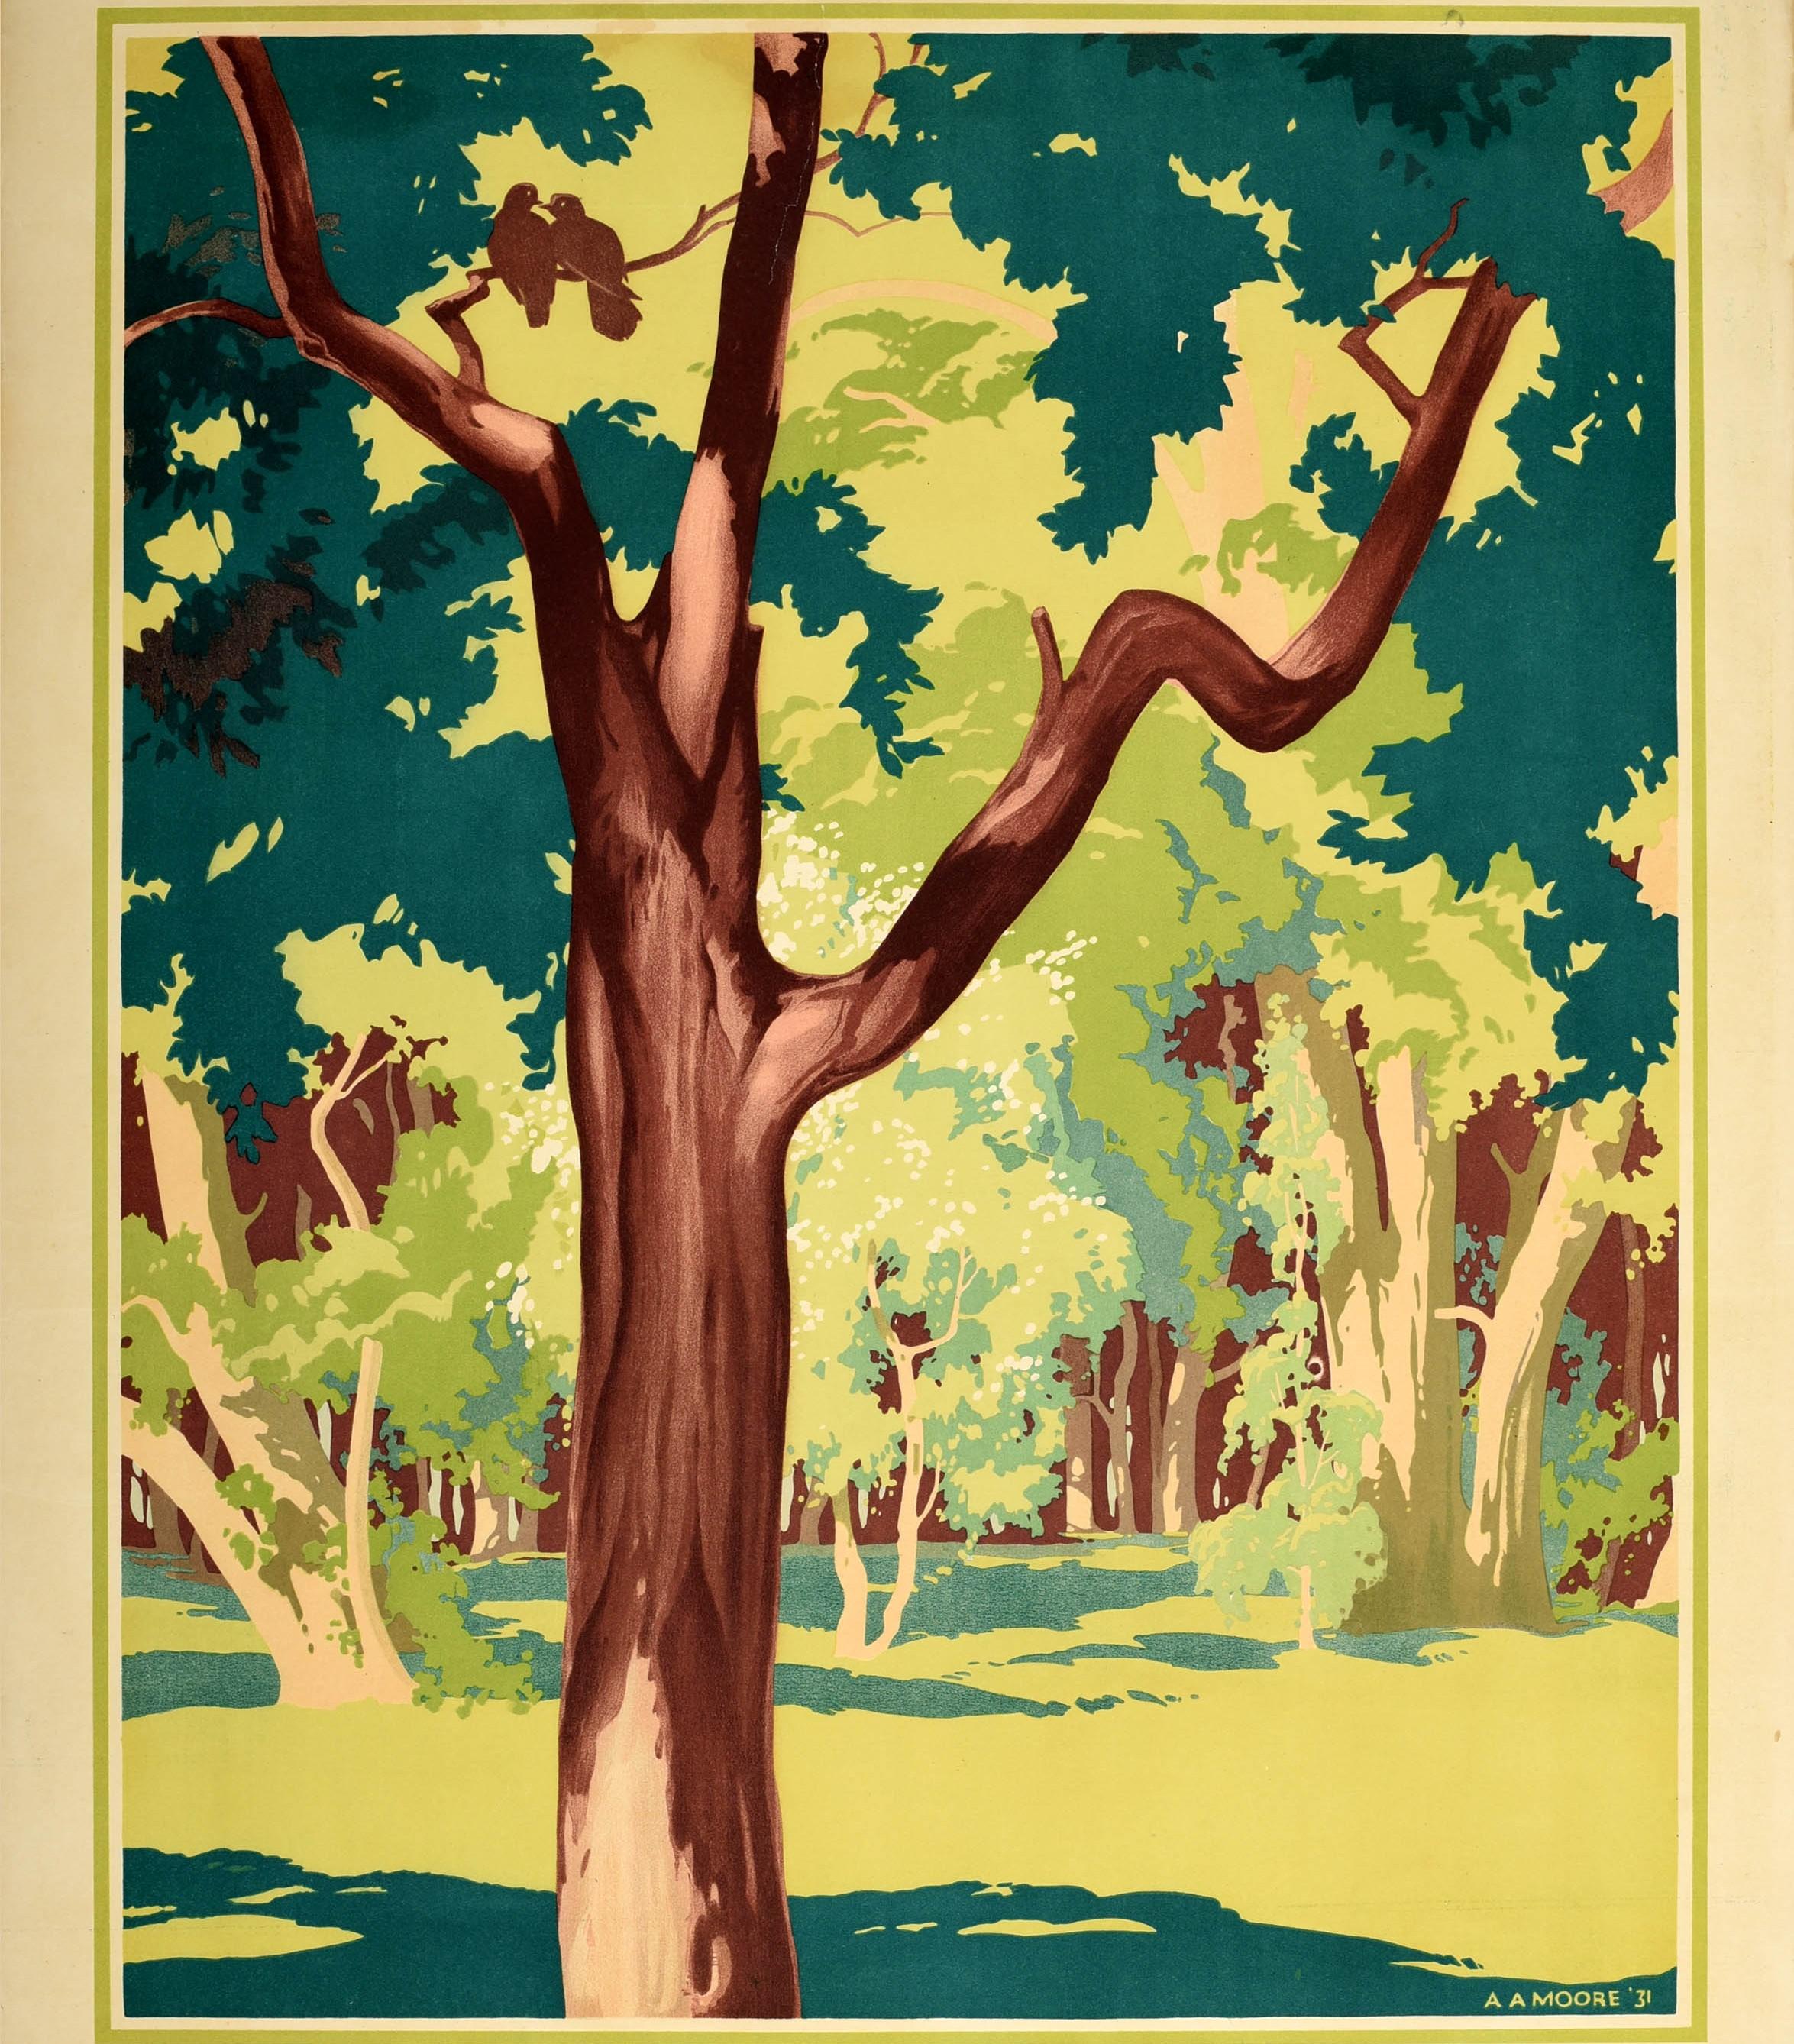 Original Vintage London Transport Poster Spring Forest Art Countryside Woods - Print by A.A. Moore